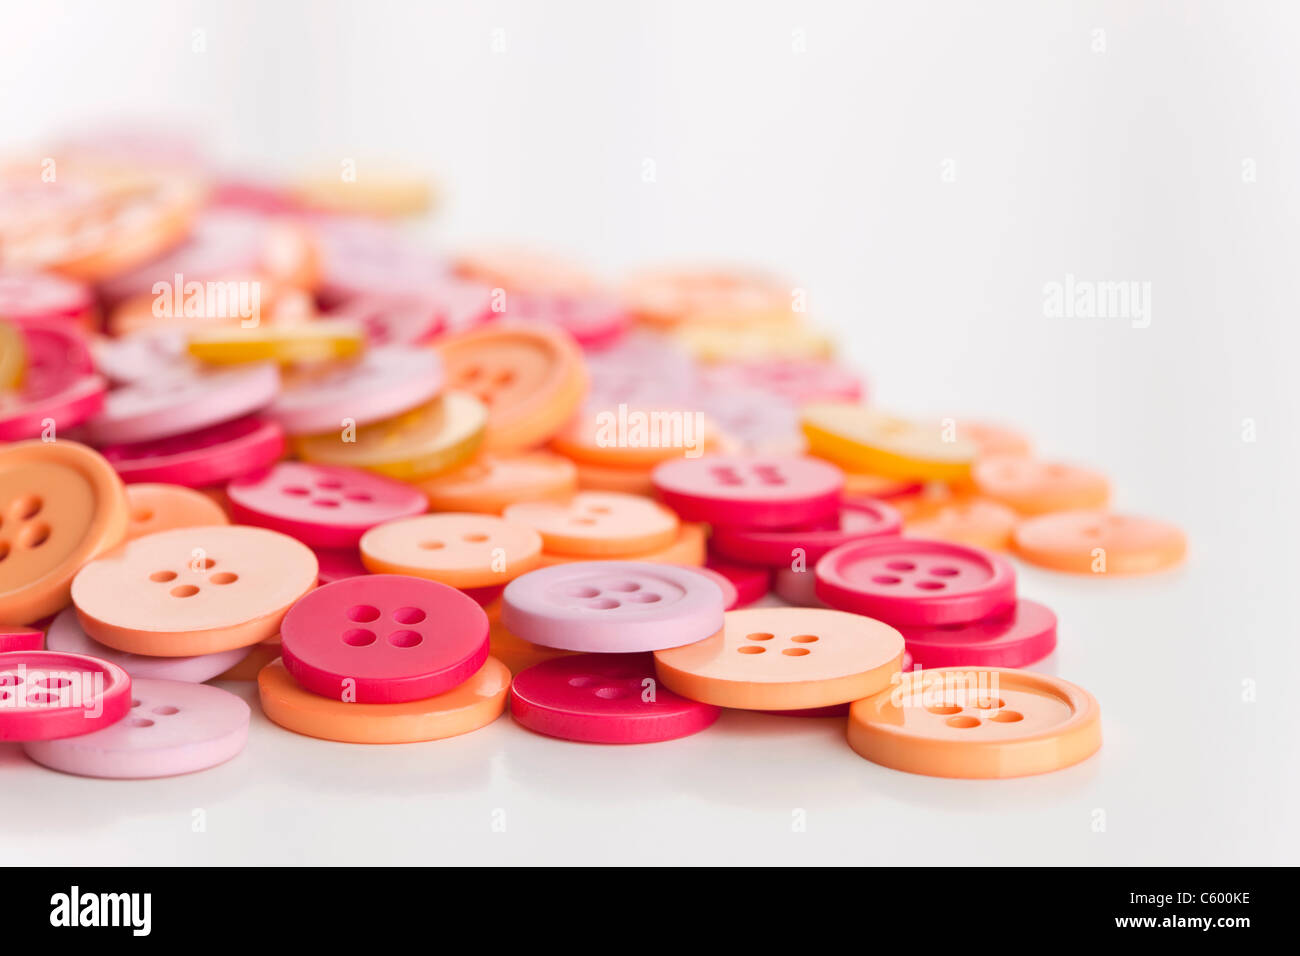 Pile of multi colored buttons Stock Photo